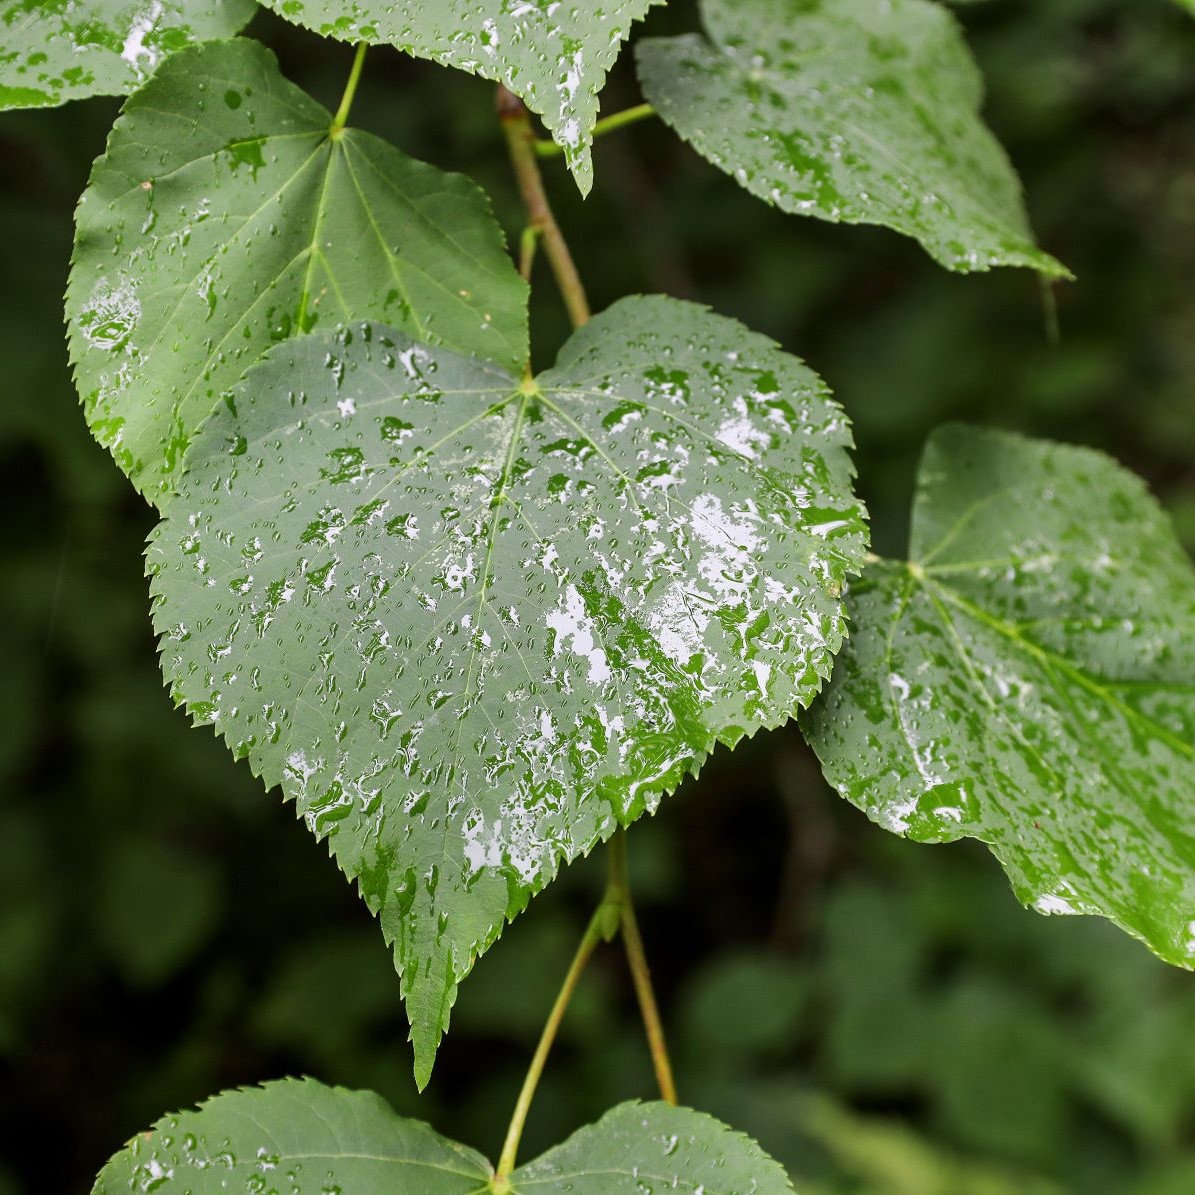 Raindrops on heart shaped leaves of a small leaved lime tree